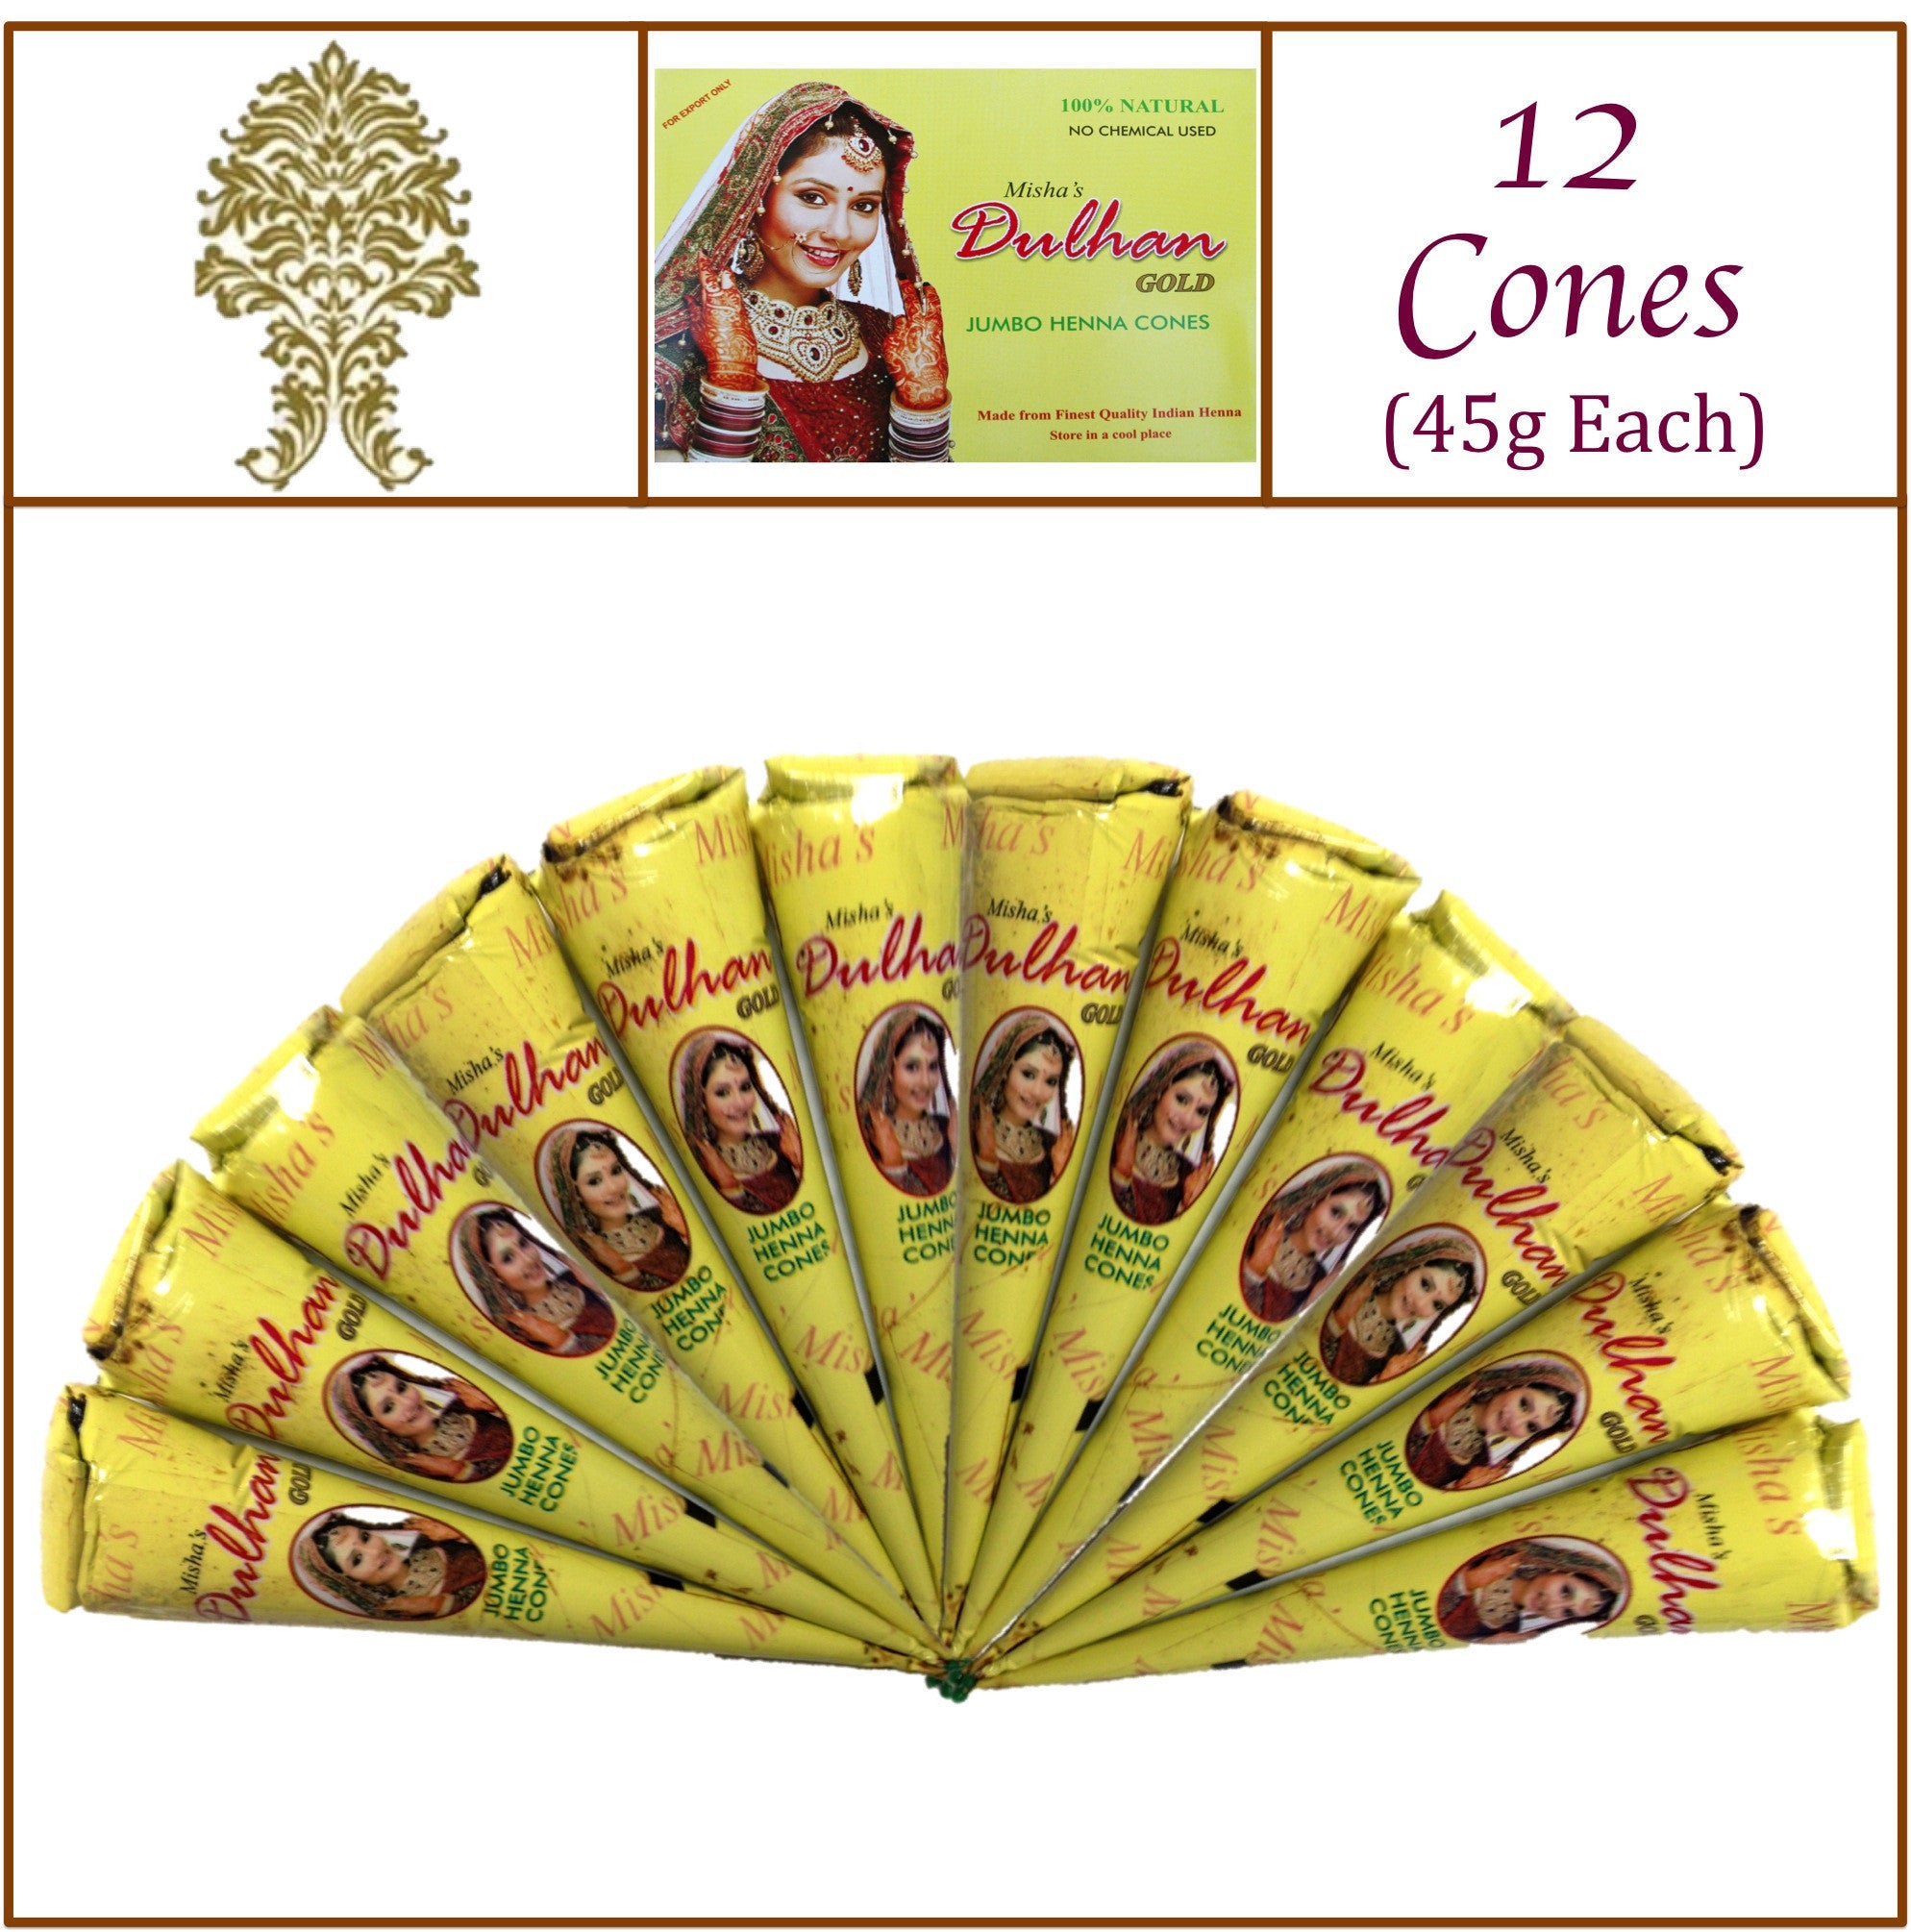 12 Jumbo Cones. Dulhan Gold Henna Paste. No Chemicals No PPD. 45g Ea.